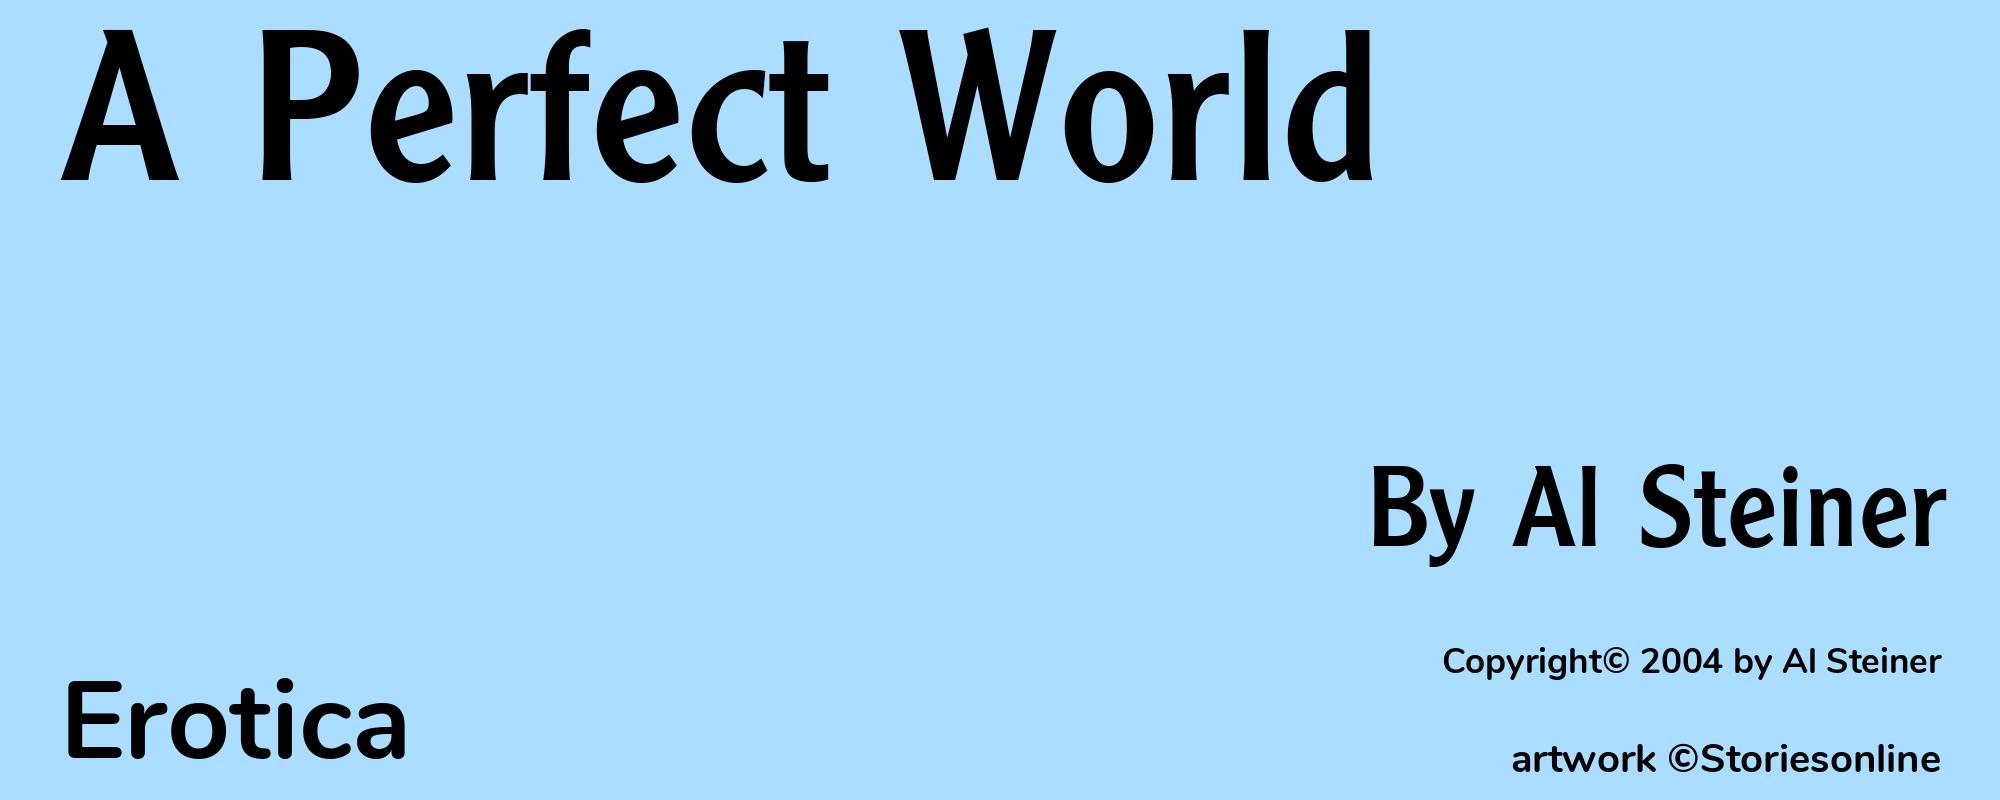 A Perfect World - Cover